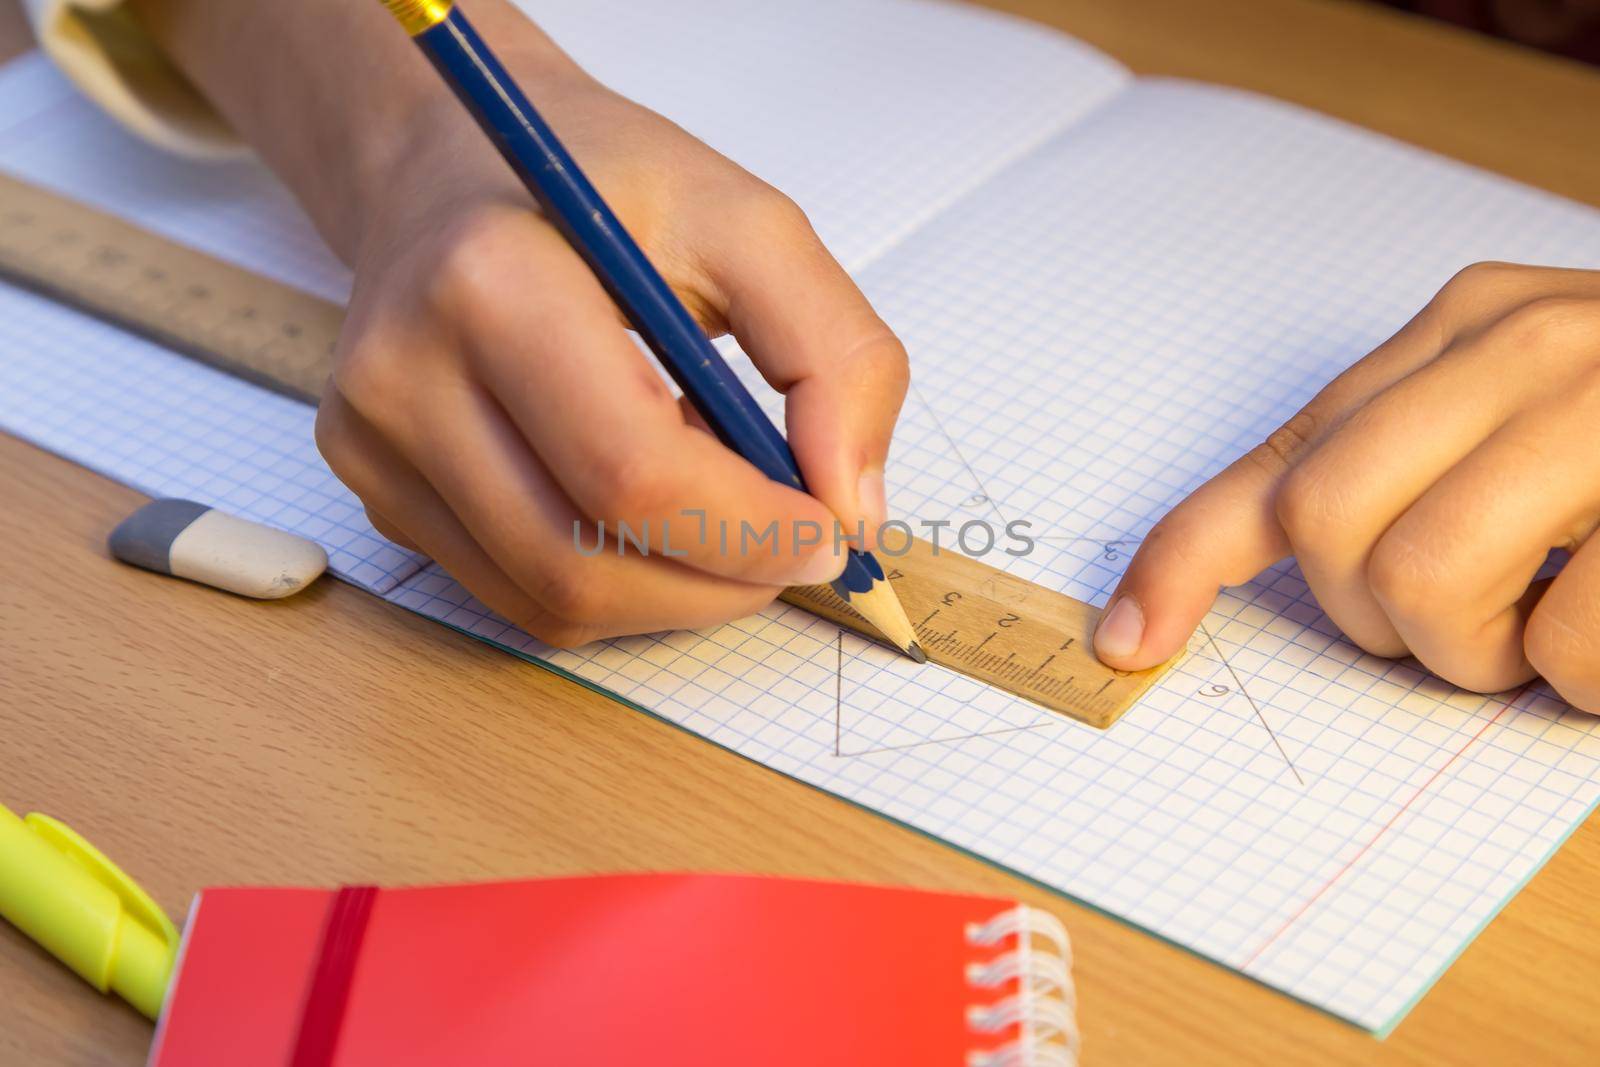 A student draws a line in a notebook with a pencil along a ruler. A schoolboy performs a task at the workplace. The concept of children's education, teaching knowledge, skills and abilities.